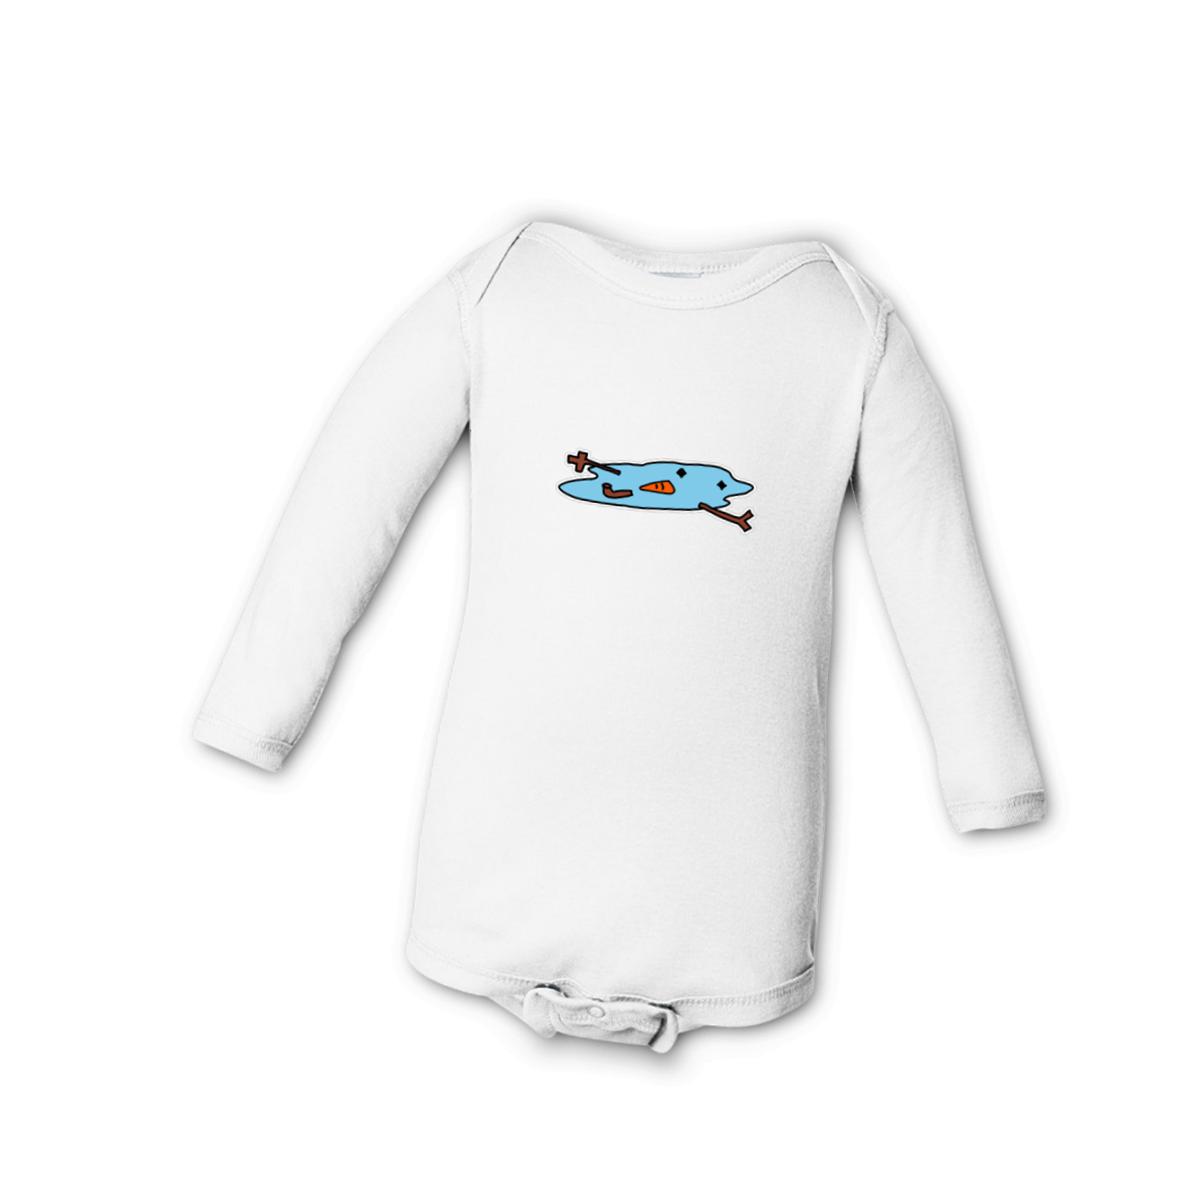 Snowman Puddle Long Sleeve Onesie 18M white